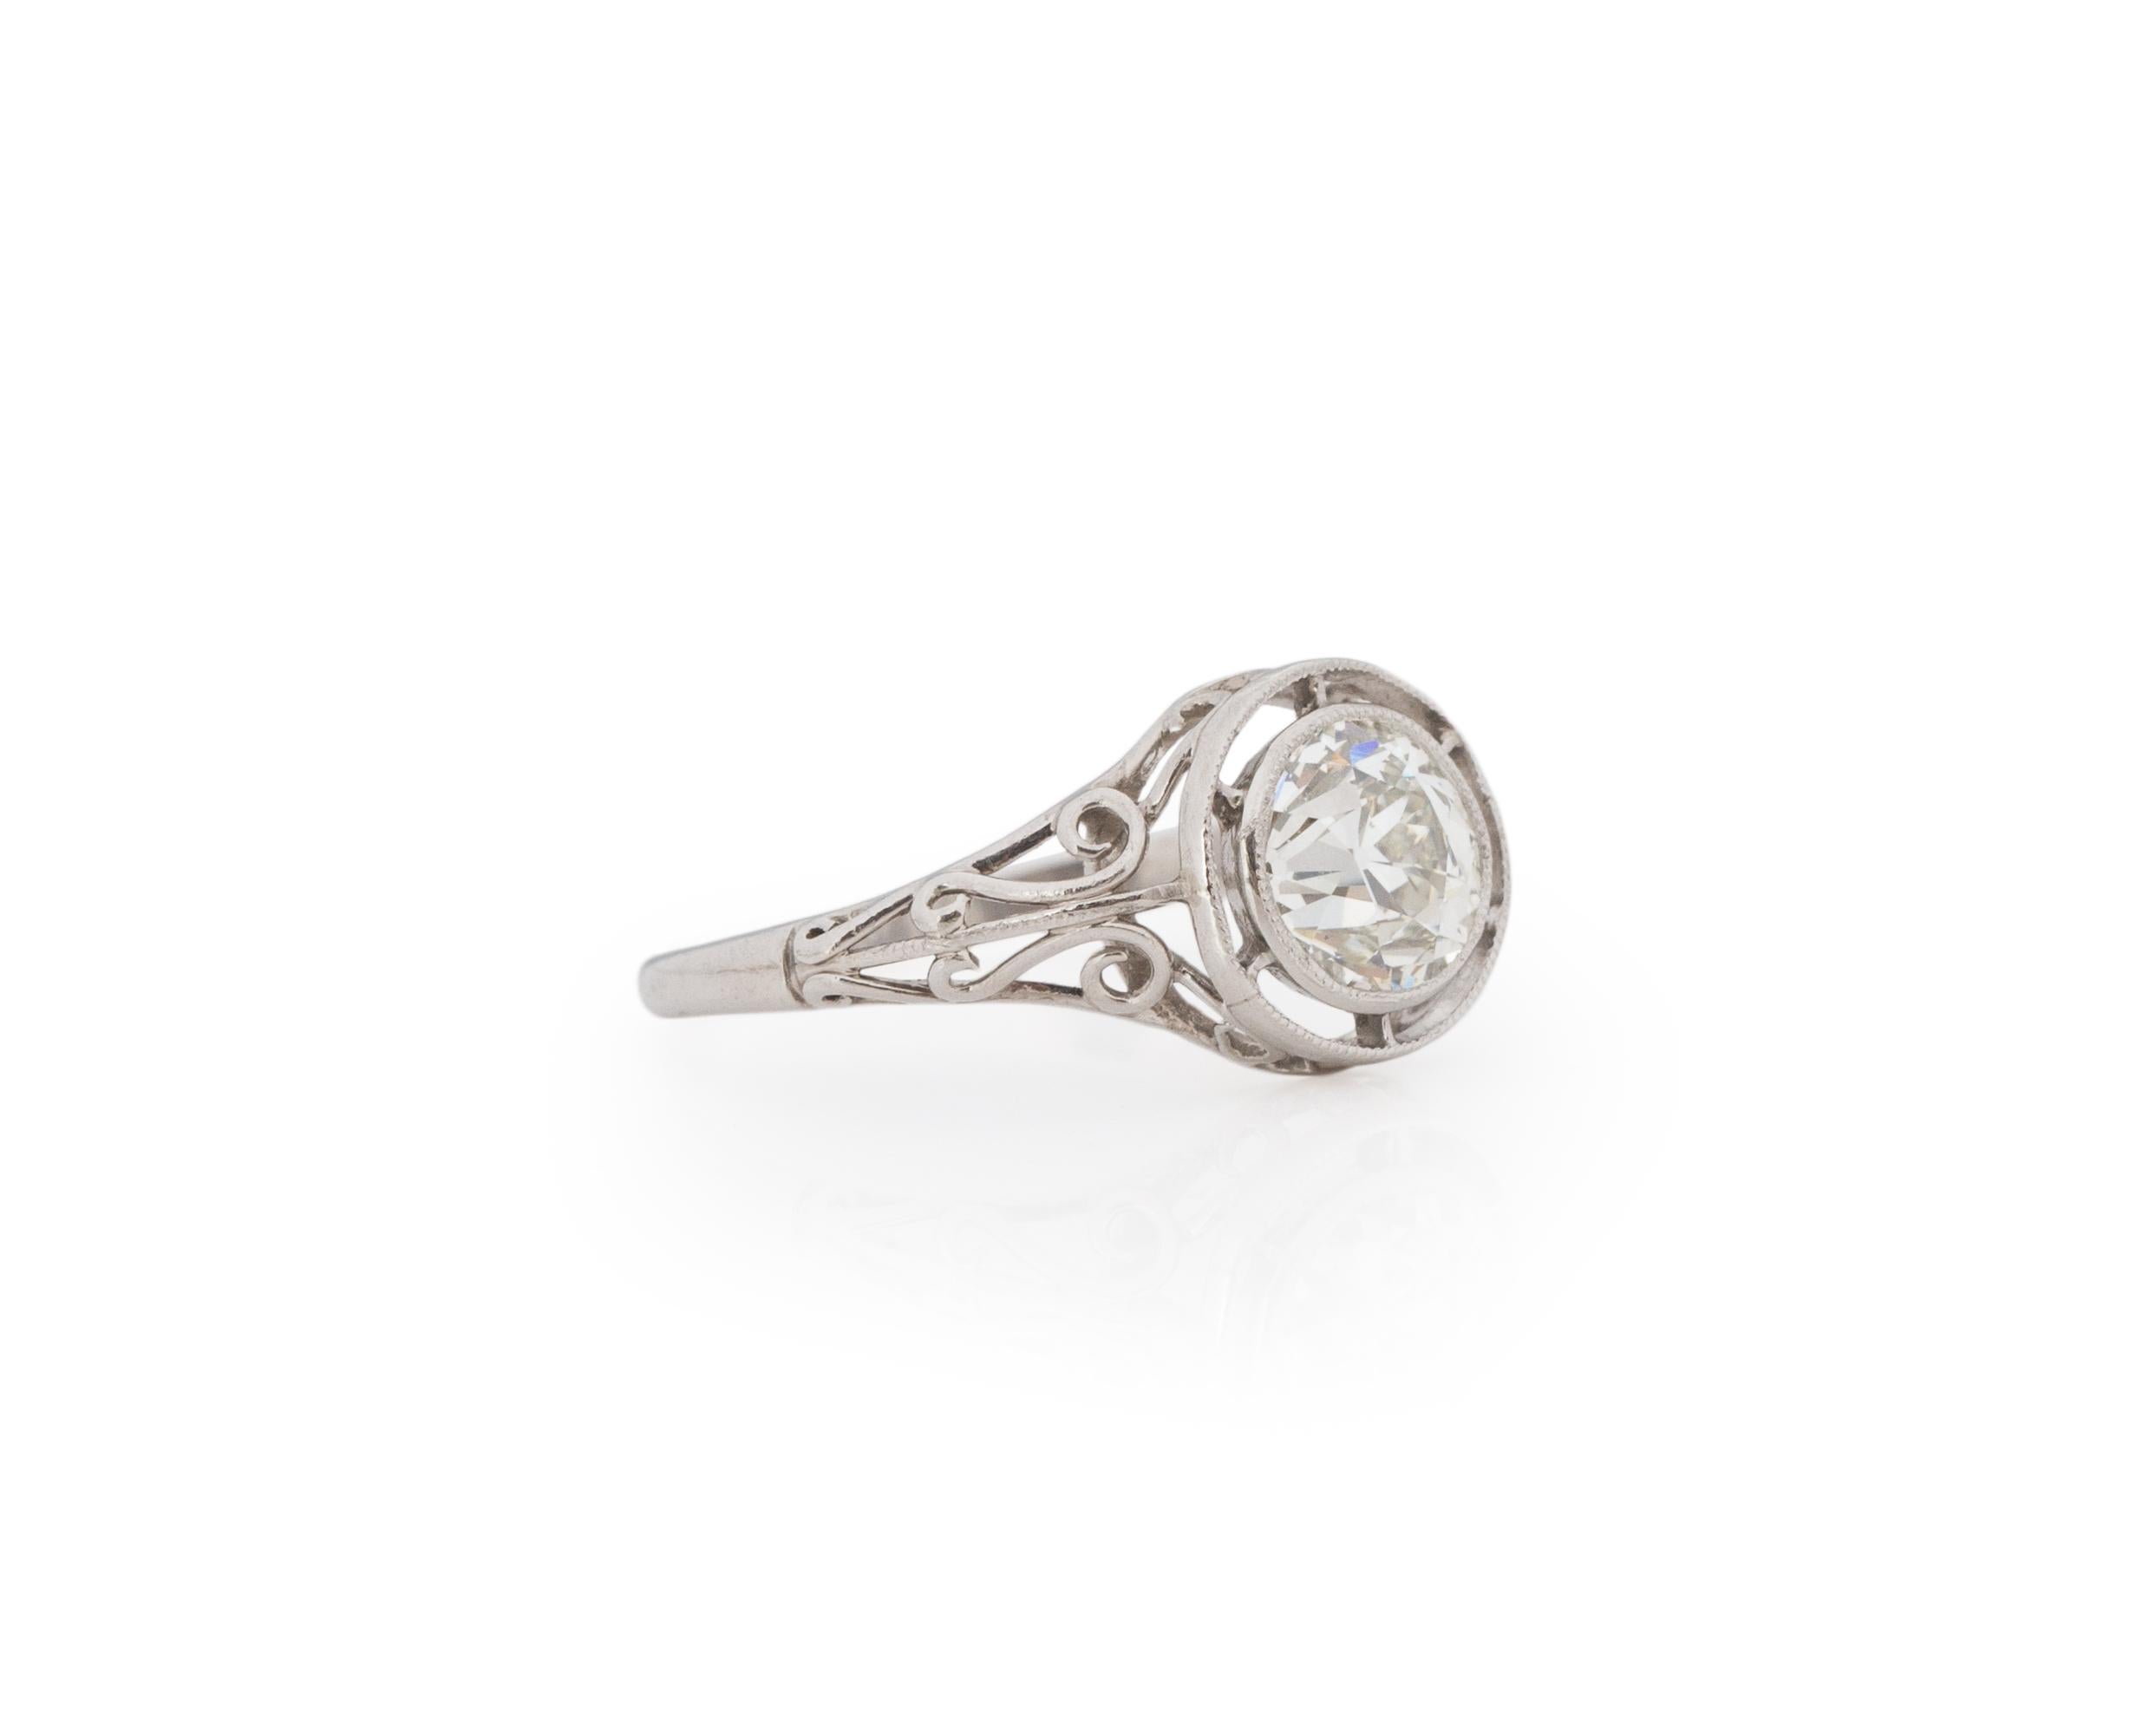 Ring Size: 4.75
Metal Type: Platinum [Hallmarked, and Tested]
Weight: 2.55 grams

Diamond Details:
GIA REPORT #: 5221534070
Weight: 1.06ct
Cut: Old European brilliant
Color: K
Clarity: VVS1
Measurements: 6.28mm x 6.23mm x 4.42mm

Finger to Top of